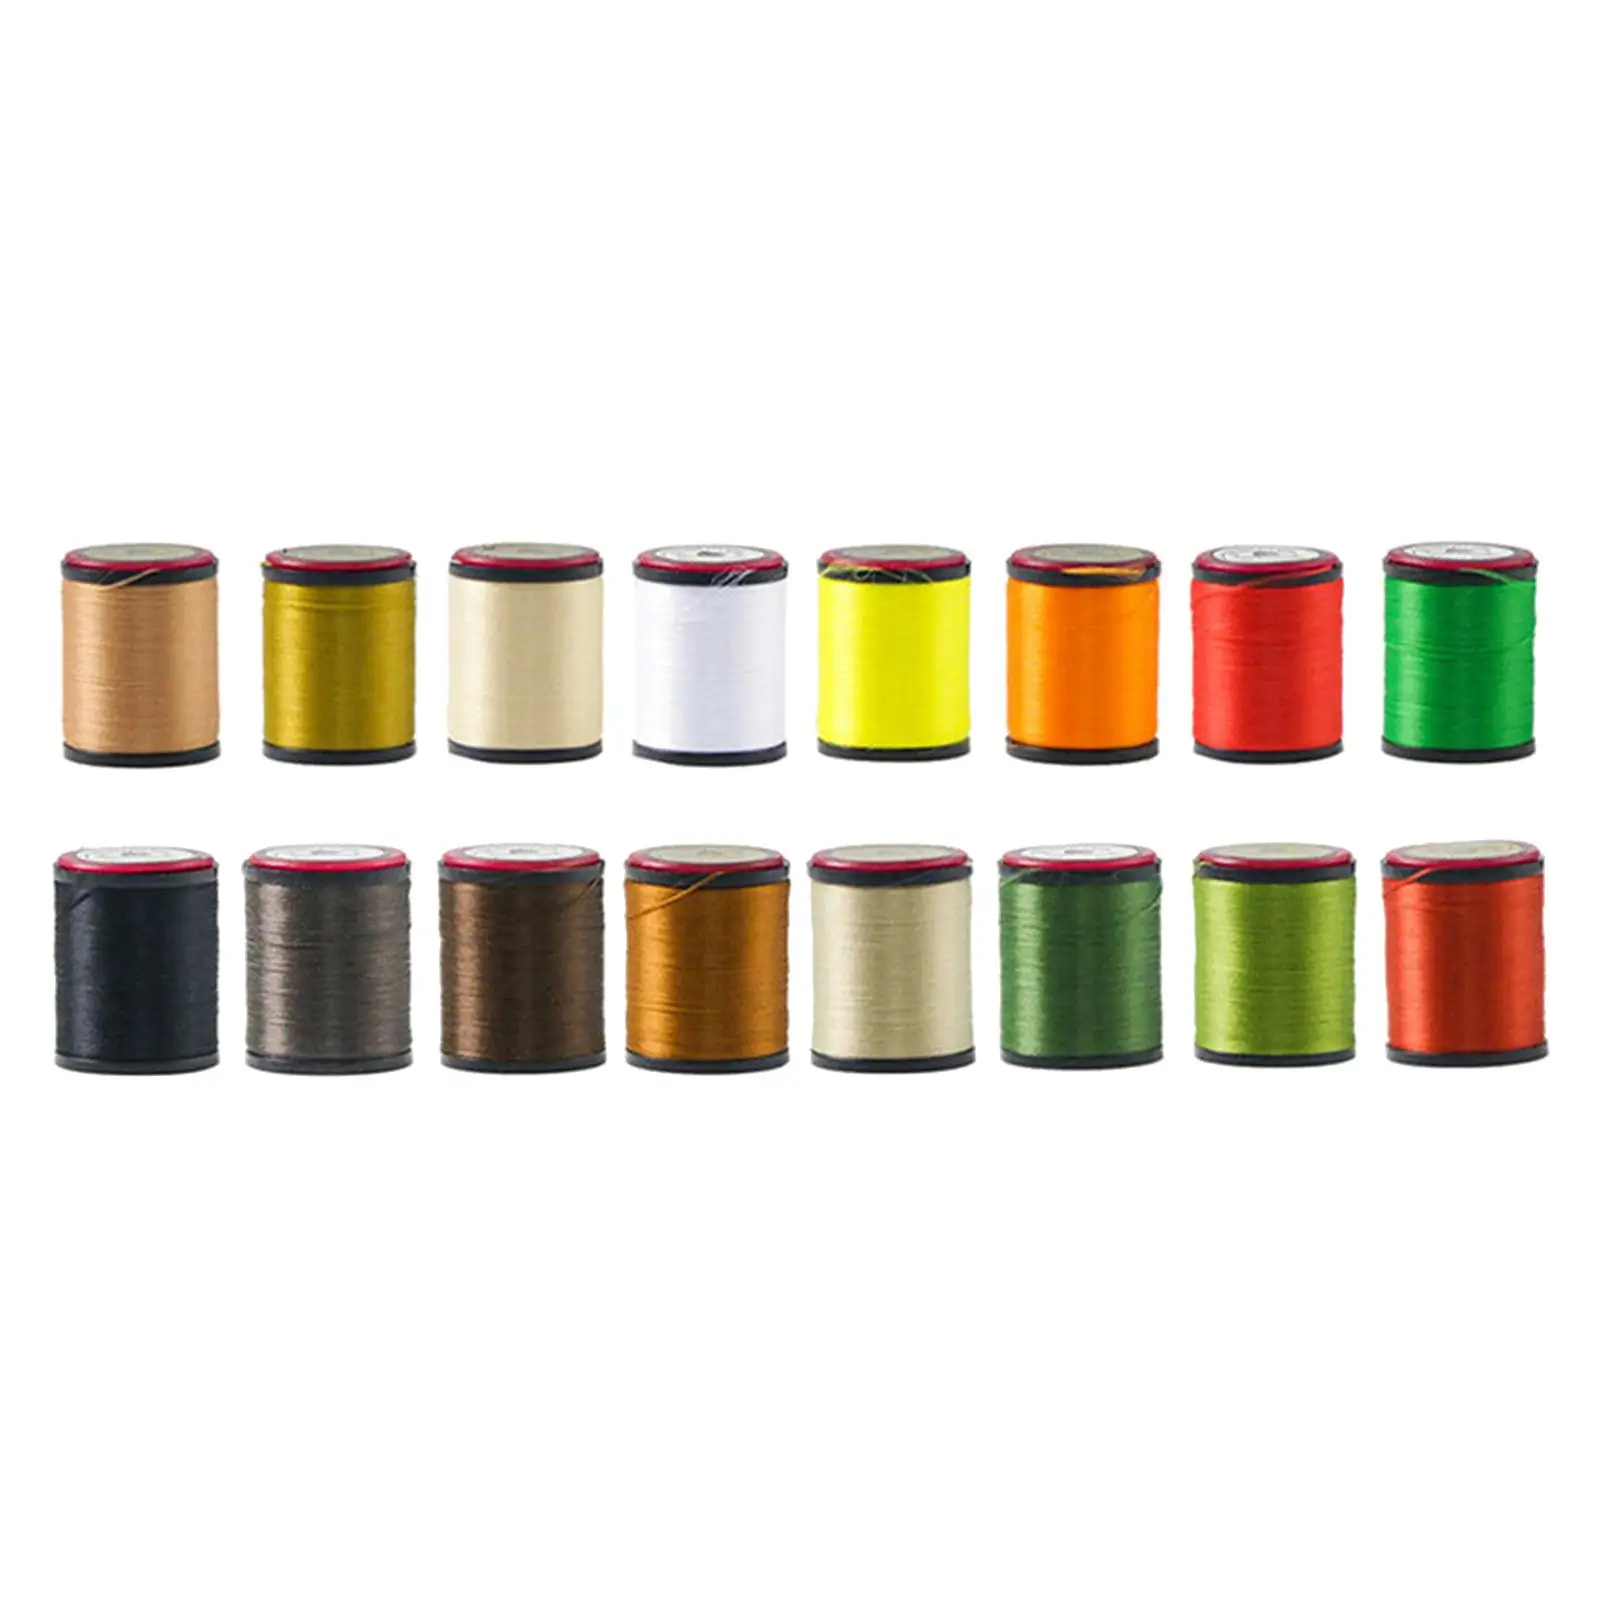 8pcs/lot Lightly Waxed Fly Tying Thread 120D Polyester Filaments Thread Fly Tying Materials